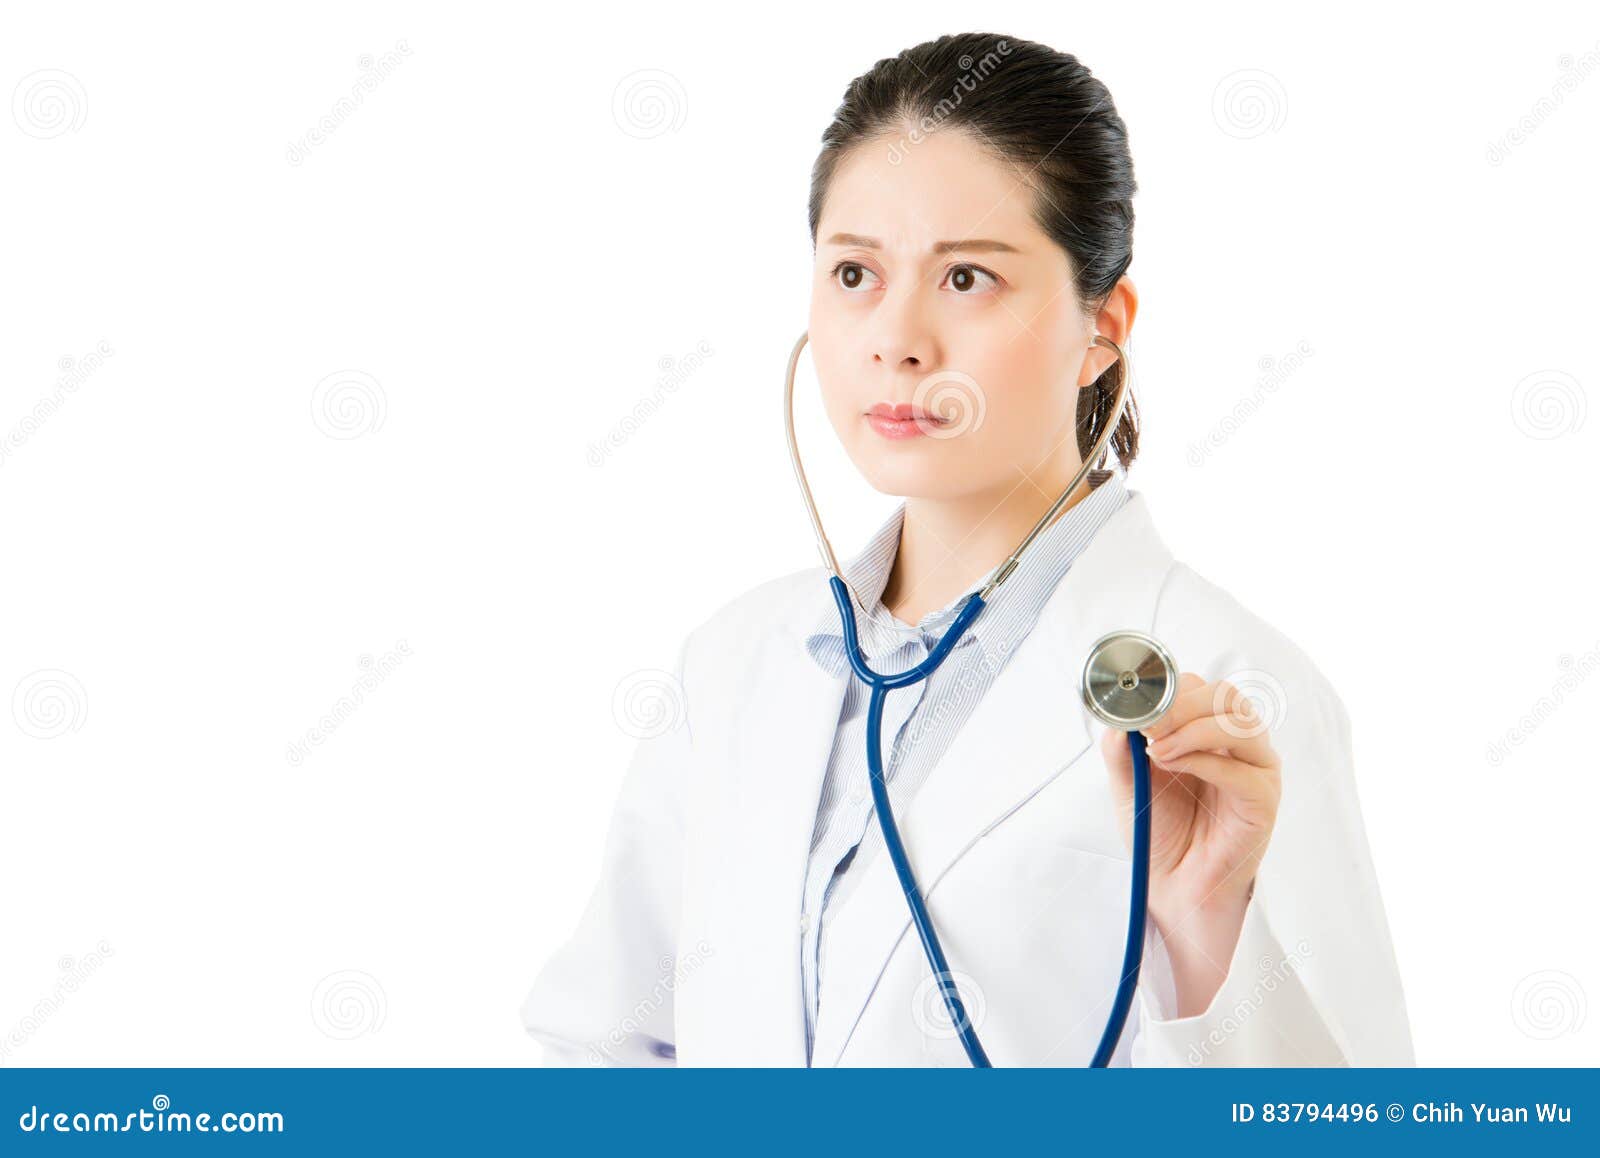 successful asian woman doctor use stethoscope to auscultation